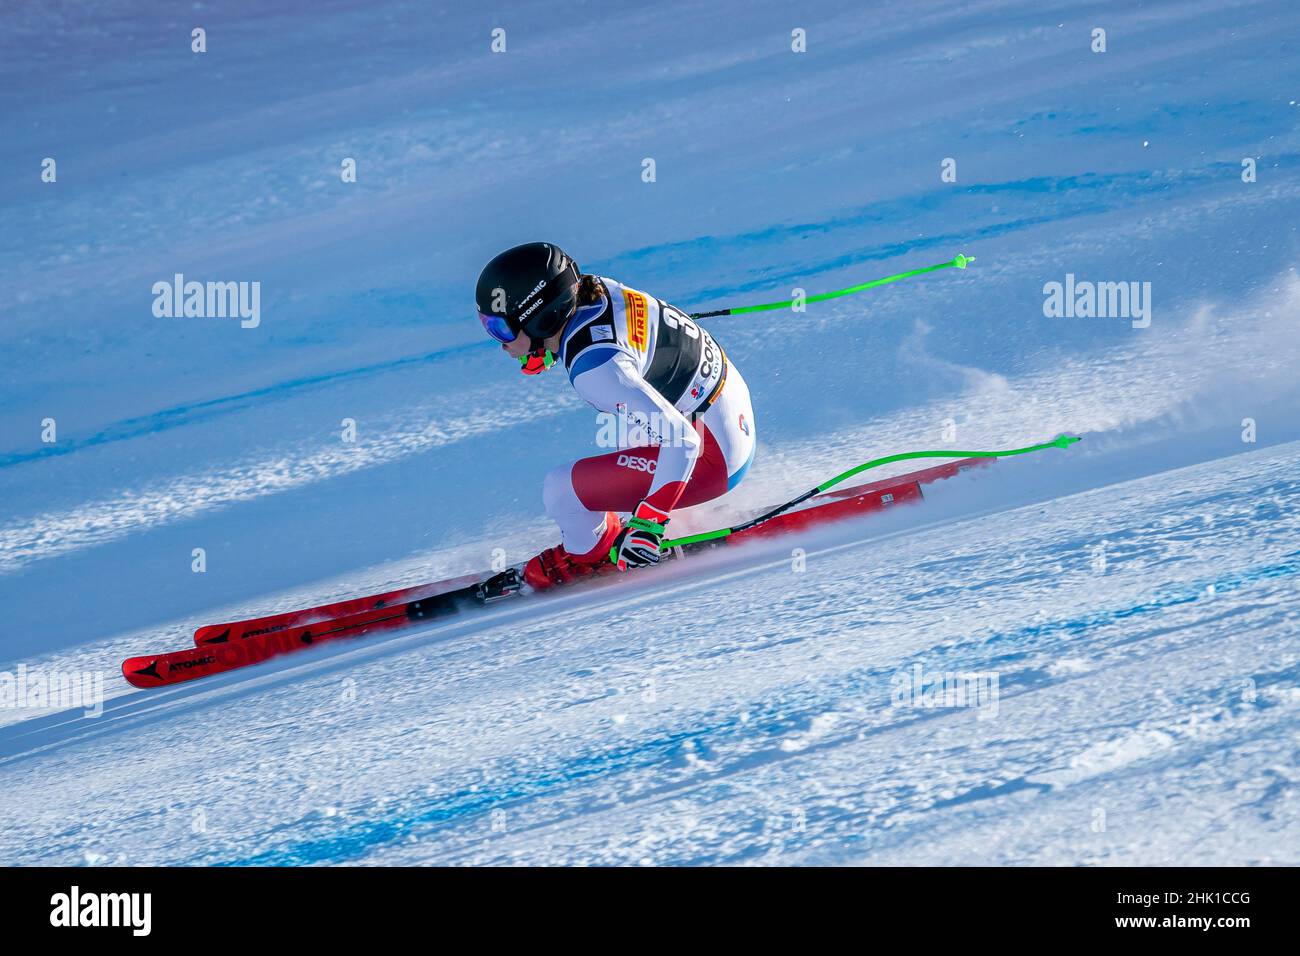 Cortina d'Ampezzo, Italy. 23 January 2022. JENAL Stephanie(SUI) competing in the Fis Alpine Ski World Cup Women's Super-G on the Olympia delle Tofane. Stock Photo